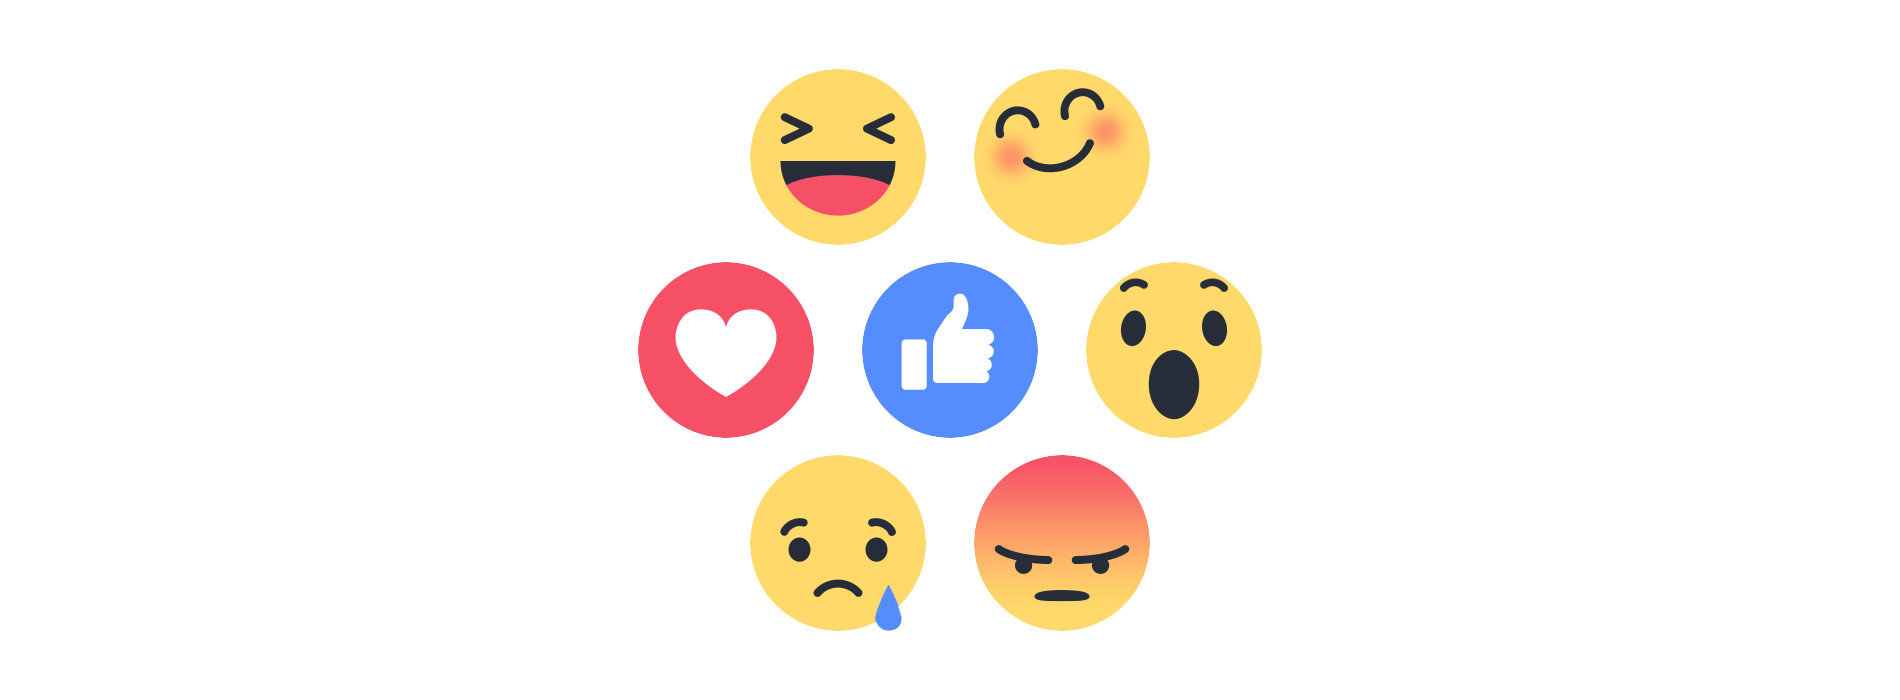 Understand online mentions – now even more effectively with Facebook reaction analysis